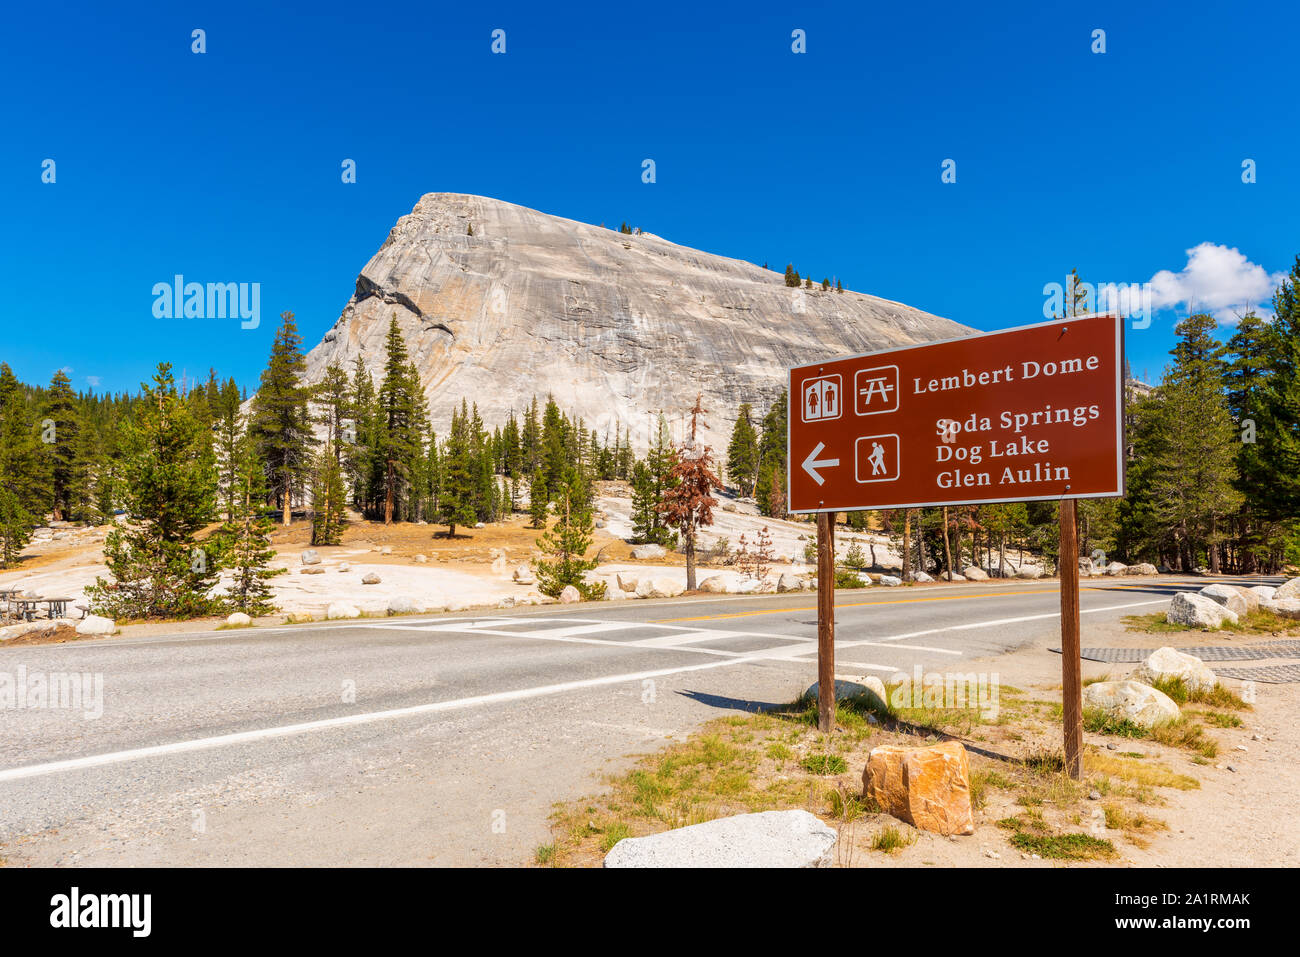 Lembert Dome in Yosemite National Park, California, USA. The directional sign points to other attractions as well. Stock Photo